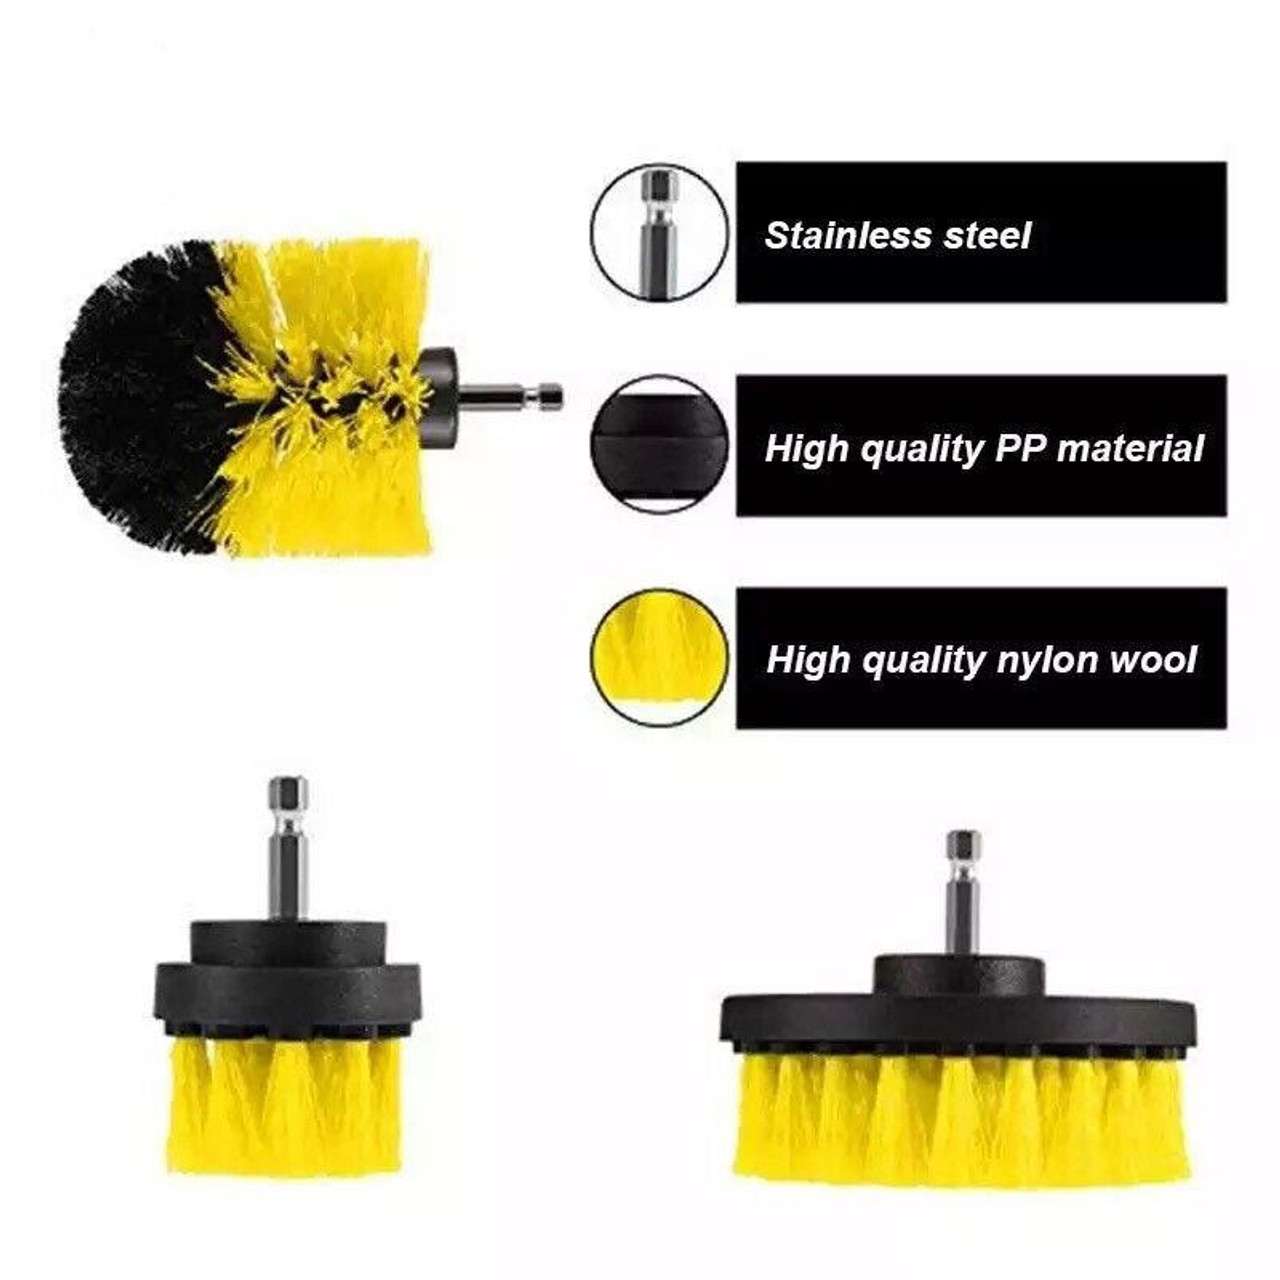 3pcs Drill Brush Set Cleaning Power Scrubber Attachment Car Tile Grout  Cleaner